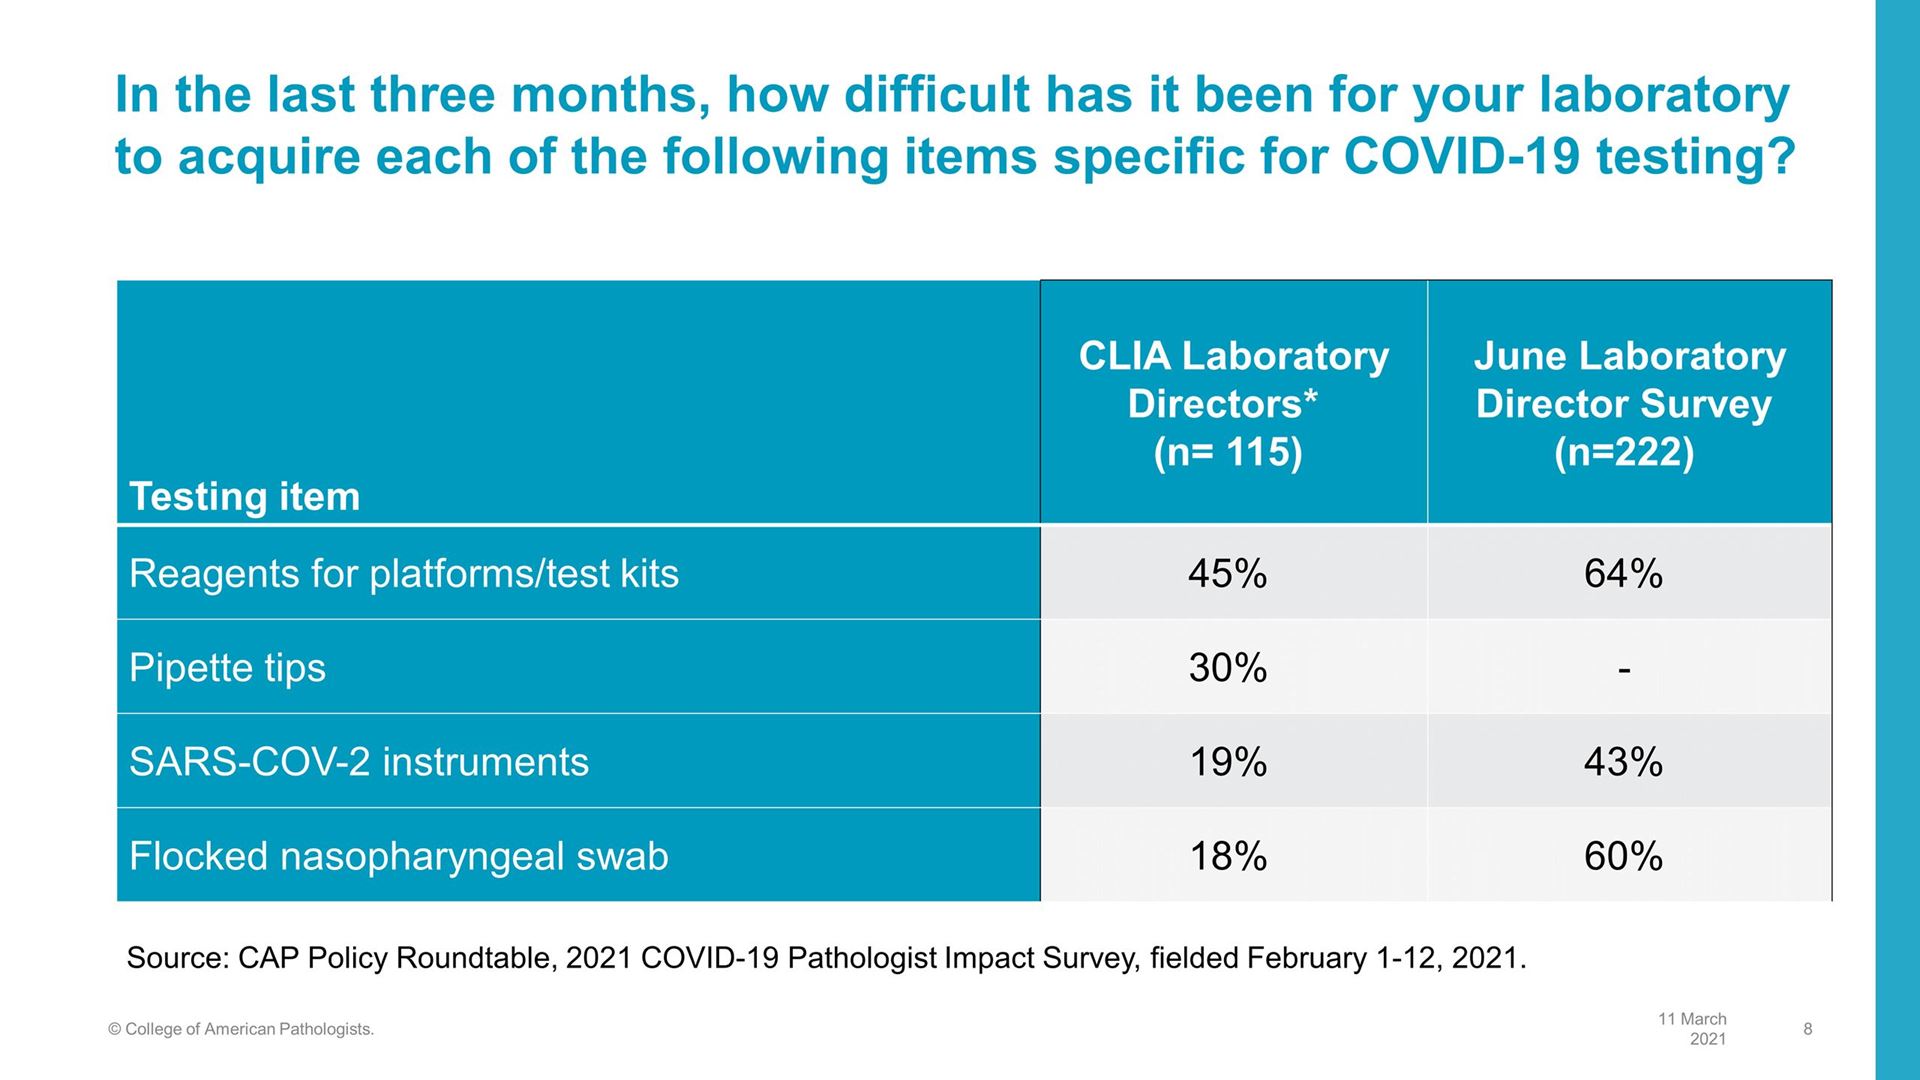 CAP Policy Roundtable, 2021 COVID-19 Pathologist Impact Survey, fielded February 1-12, 2021